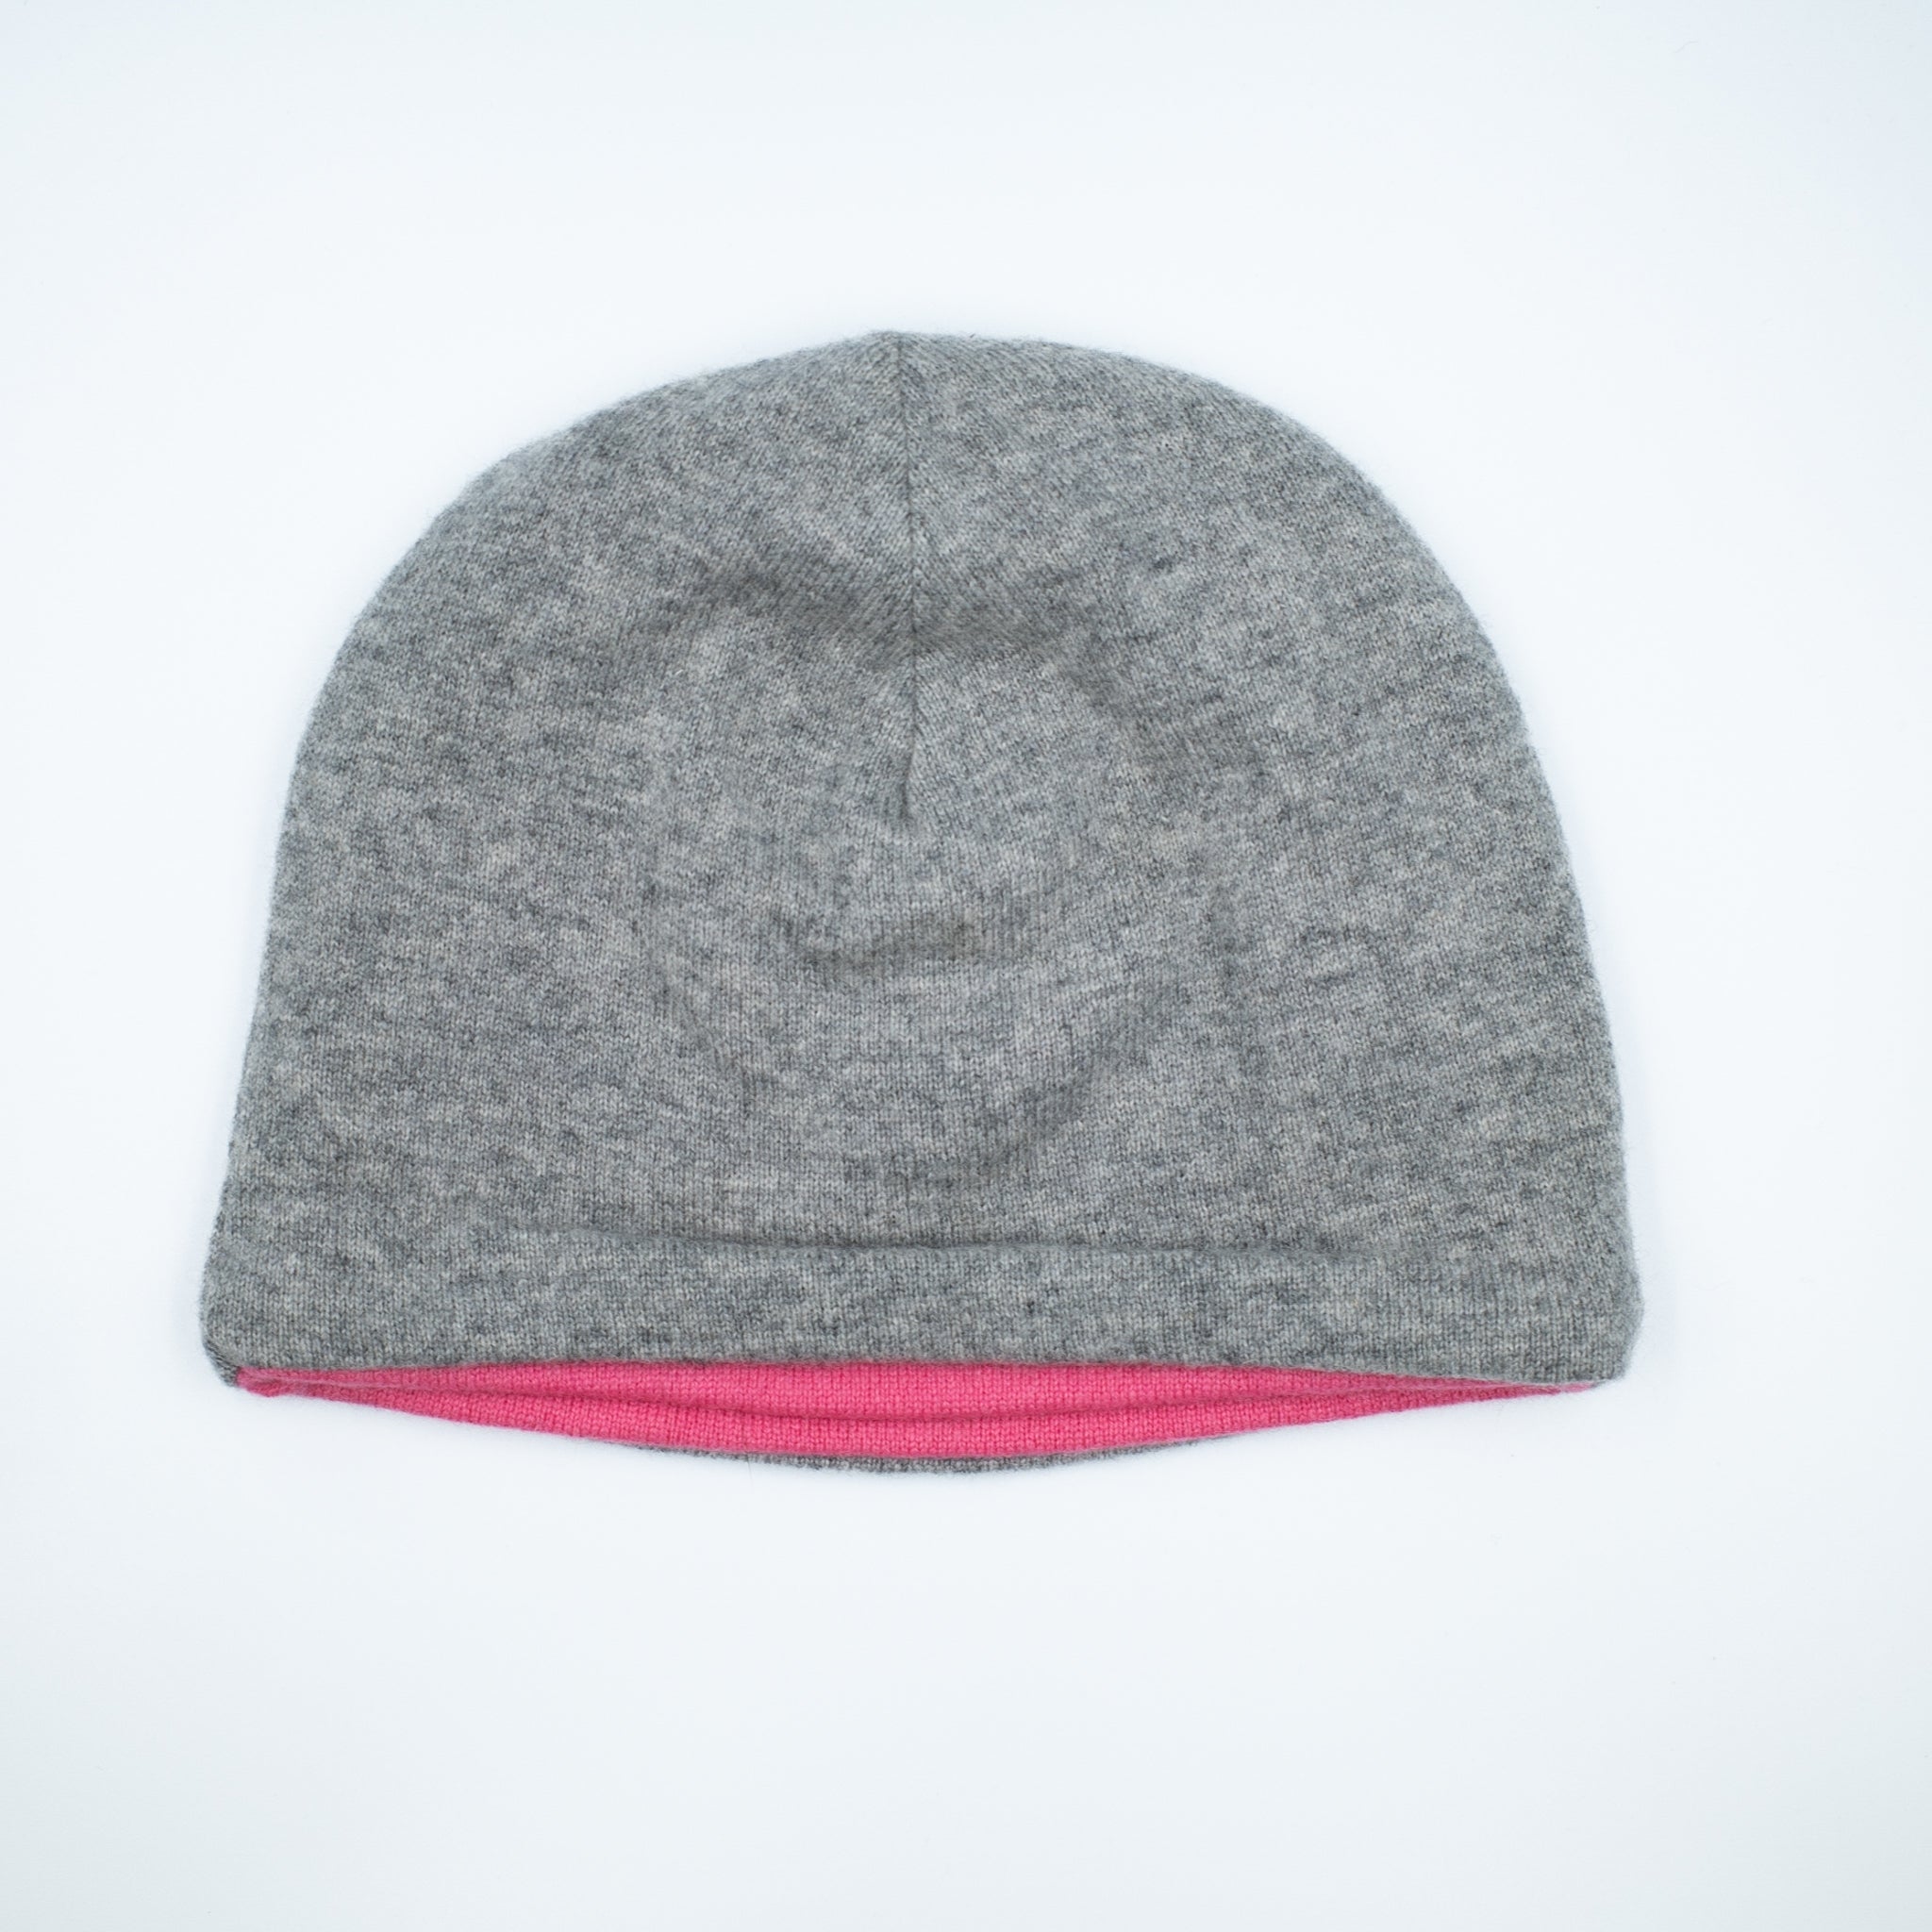 Smoke Grey and Lupin Pink Cashmere Beanie Hat